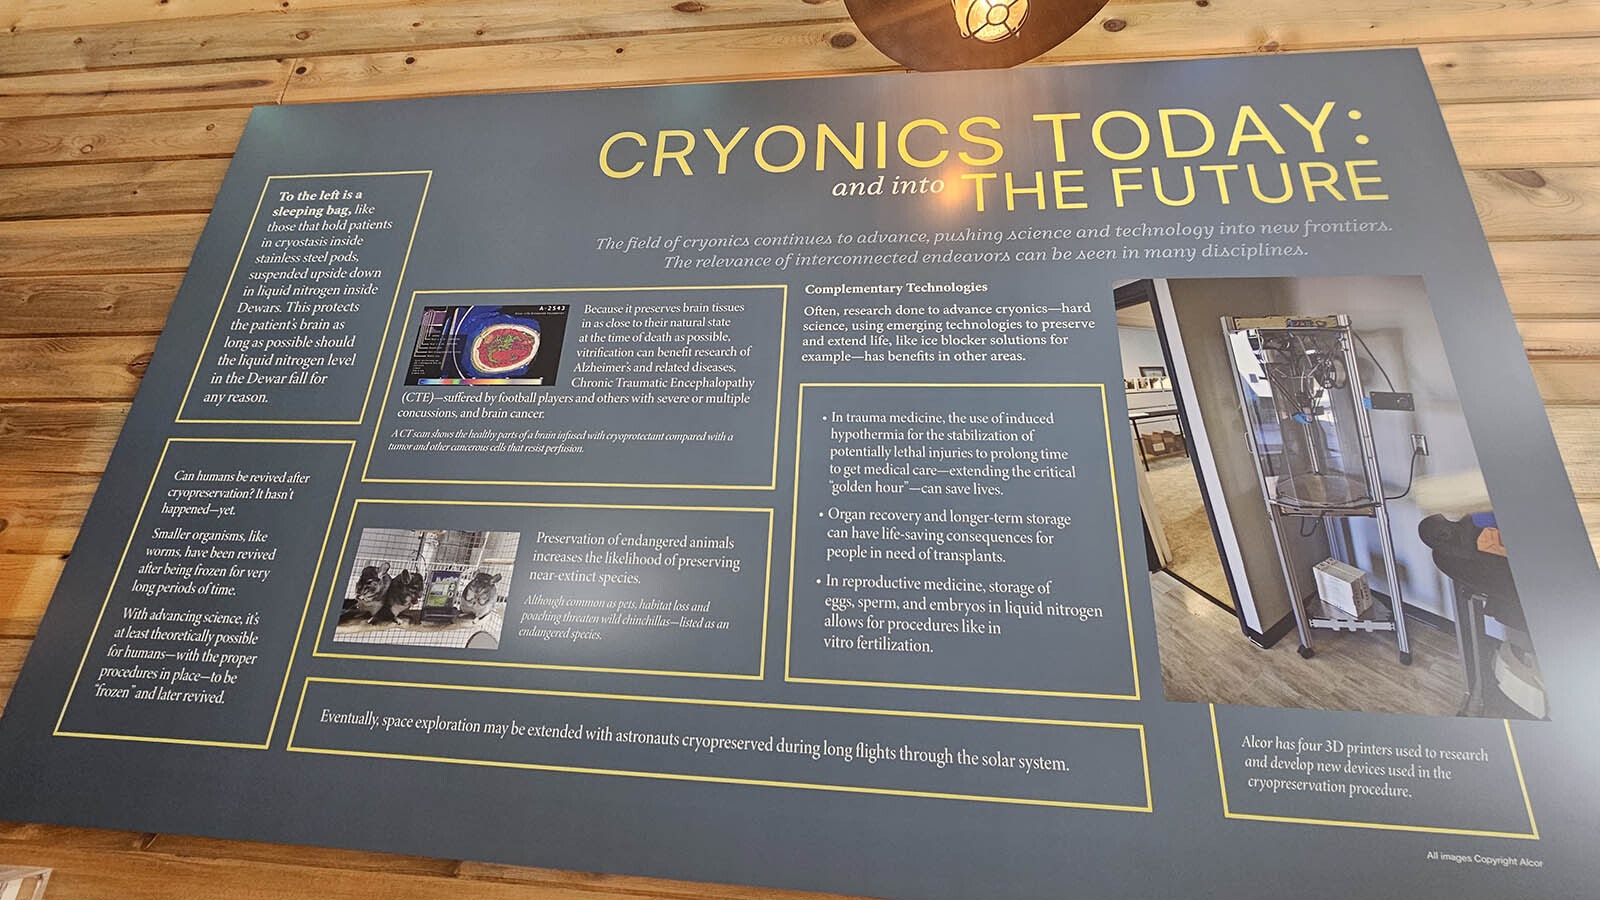 Among the educational materials is this one explaining present-day uses of cryonics to preserve biological tissues.